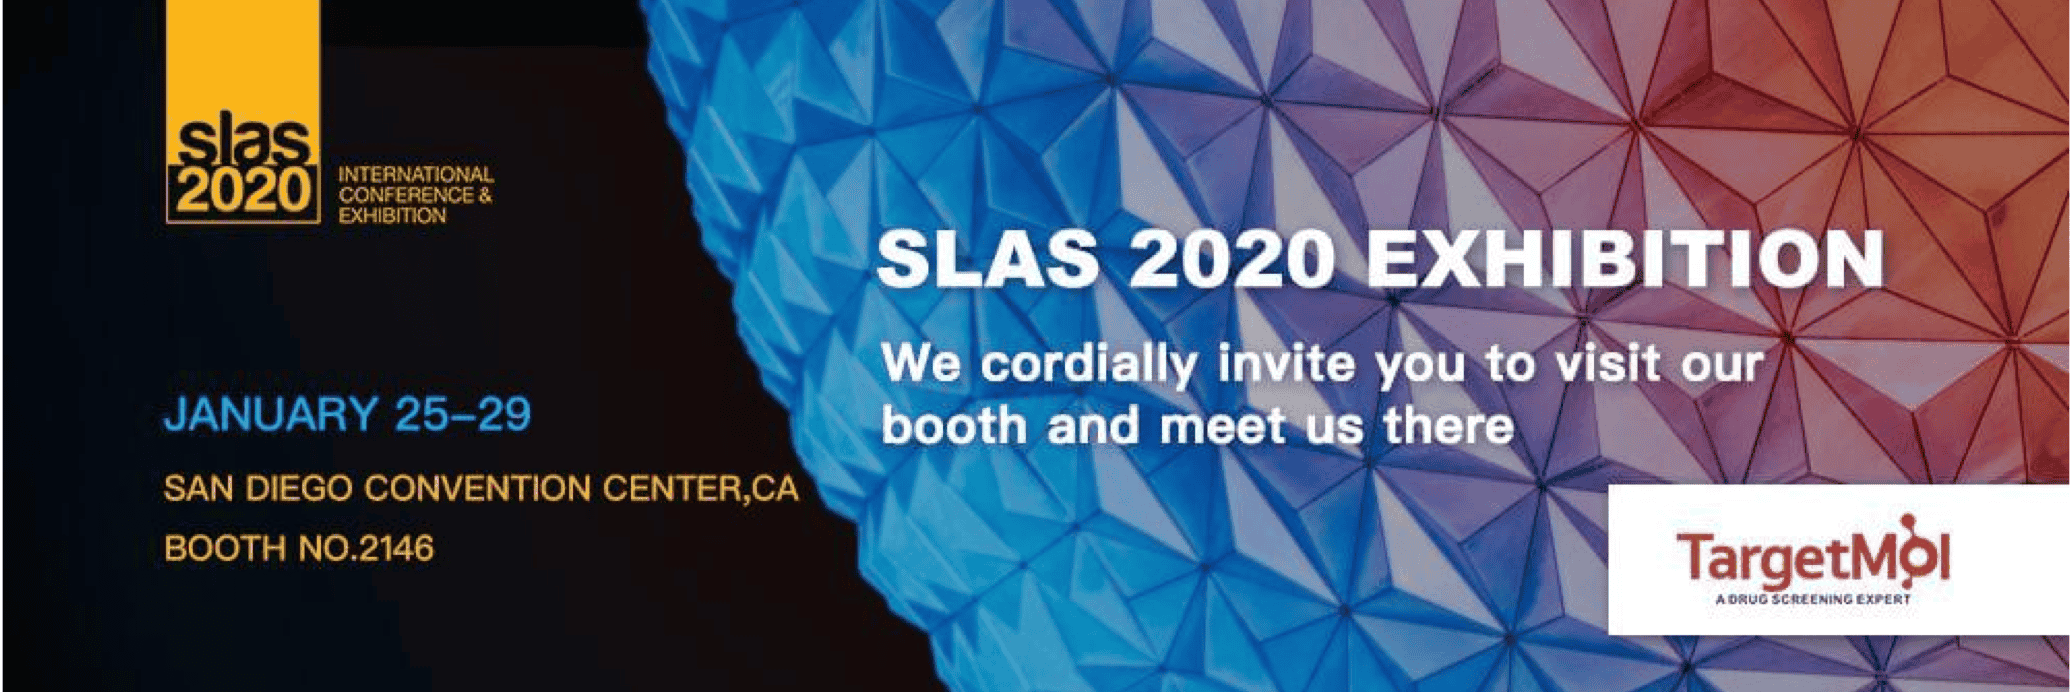 TargetMol will attend SLAS 2020 exhibition from January 25 to 29, 2020 at San Diego